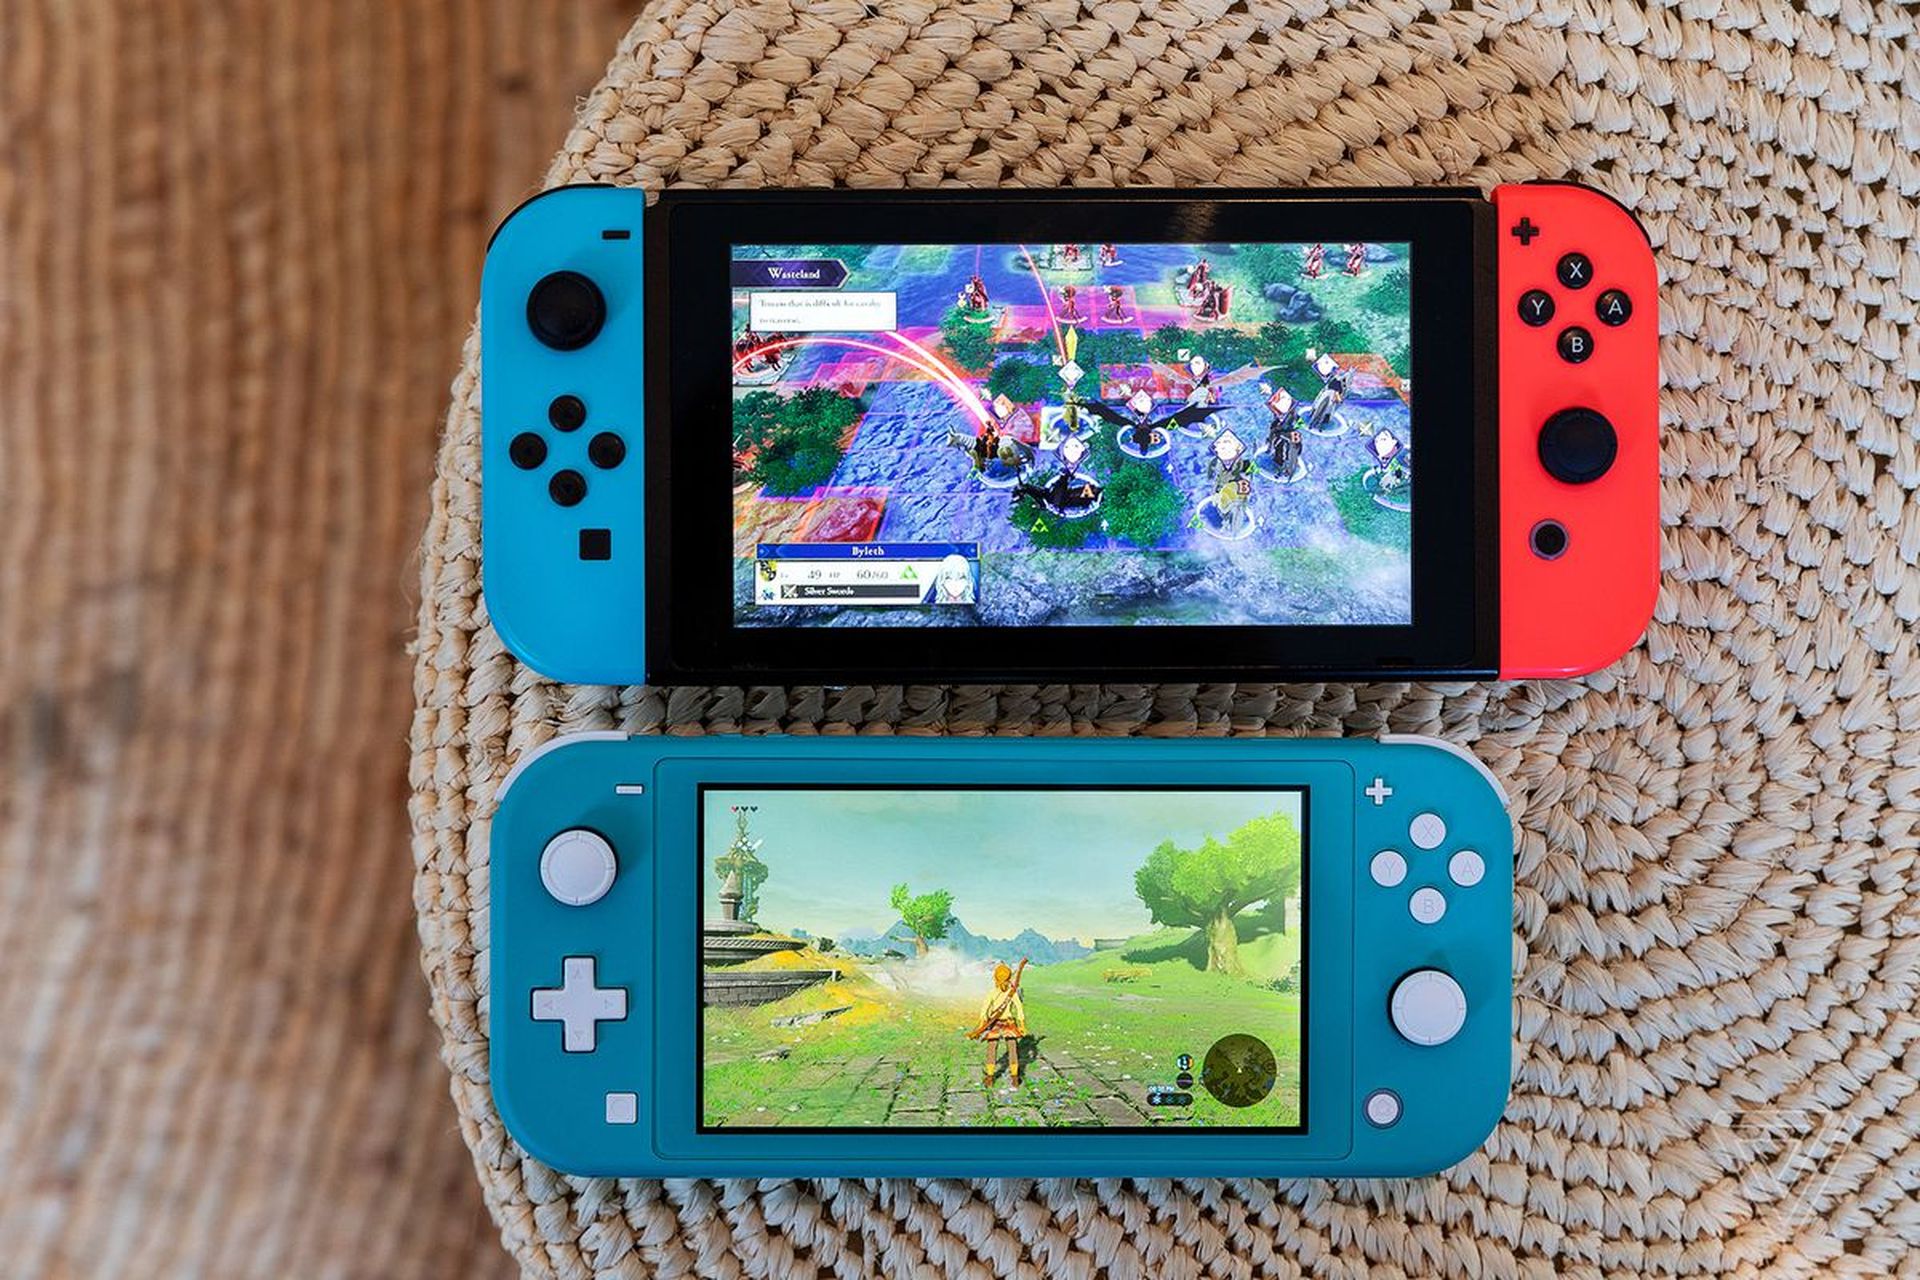 In this article, we will be covering best role playing games on Nintendo Switch in 2022, so you can pick and choose which one you will play next time around.